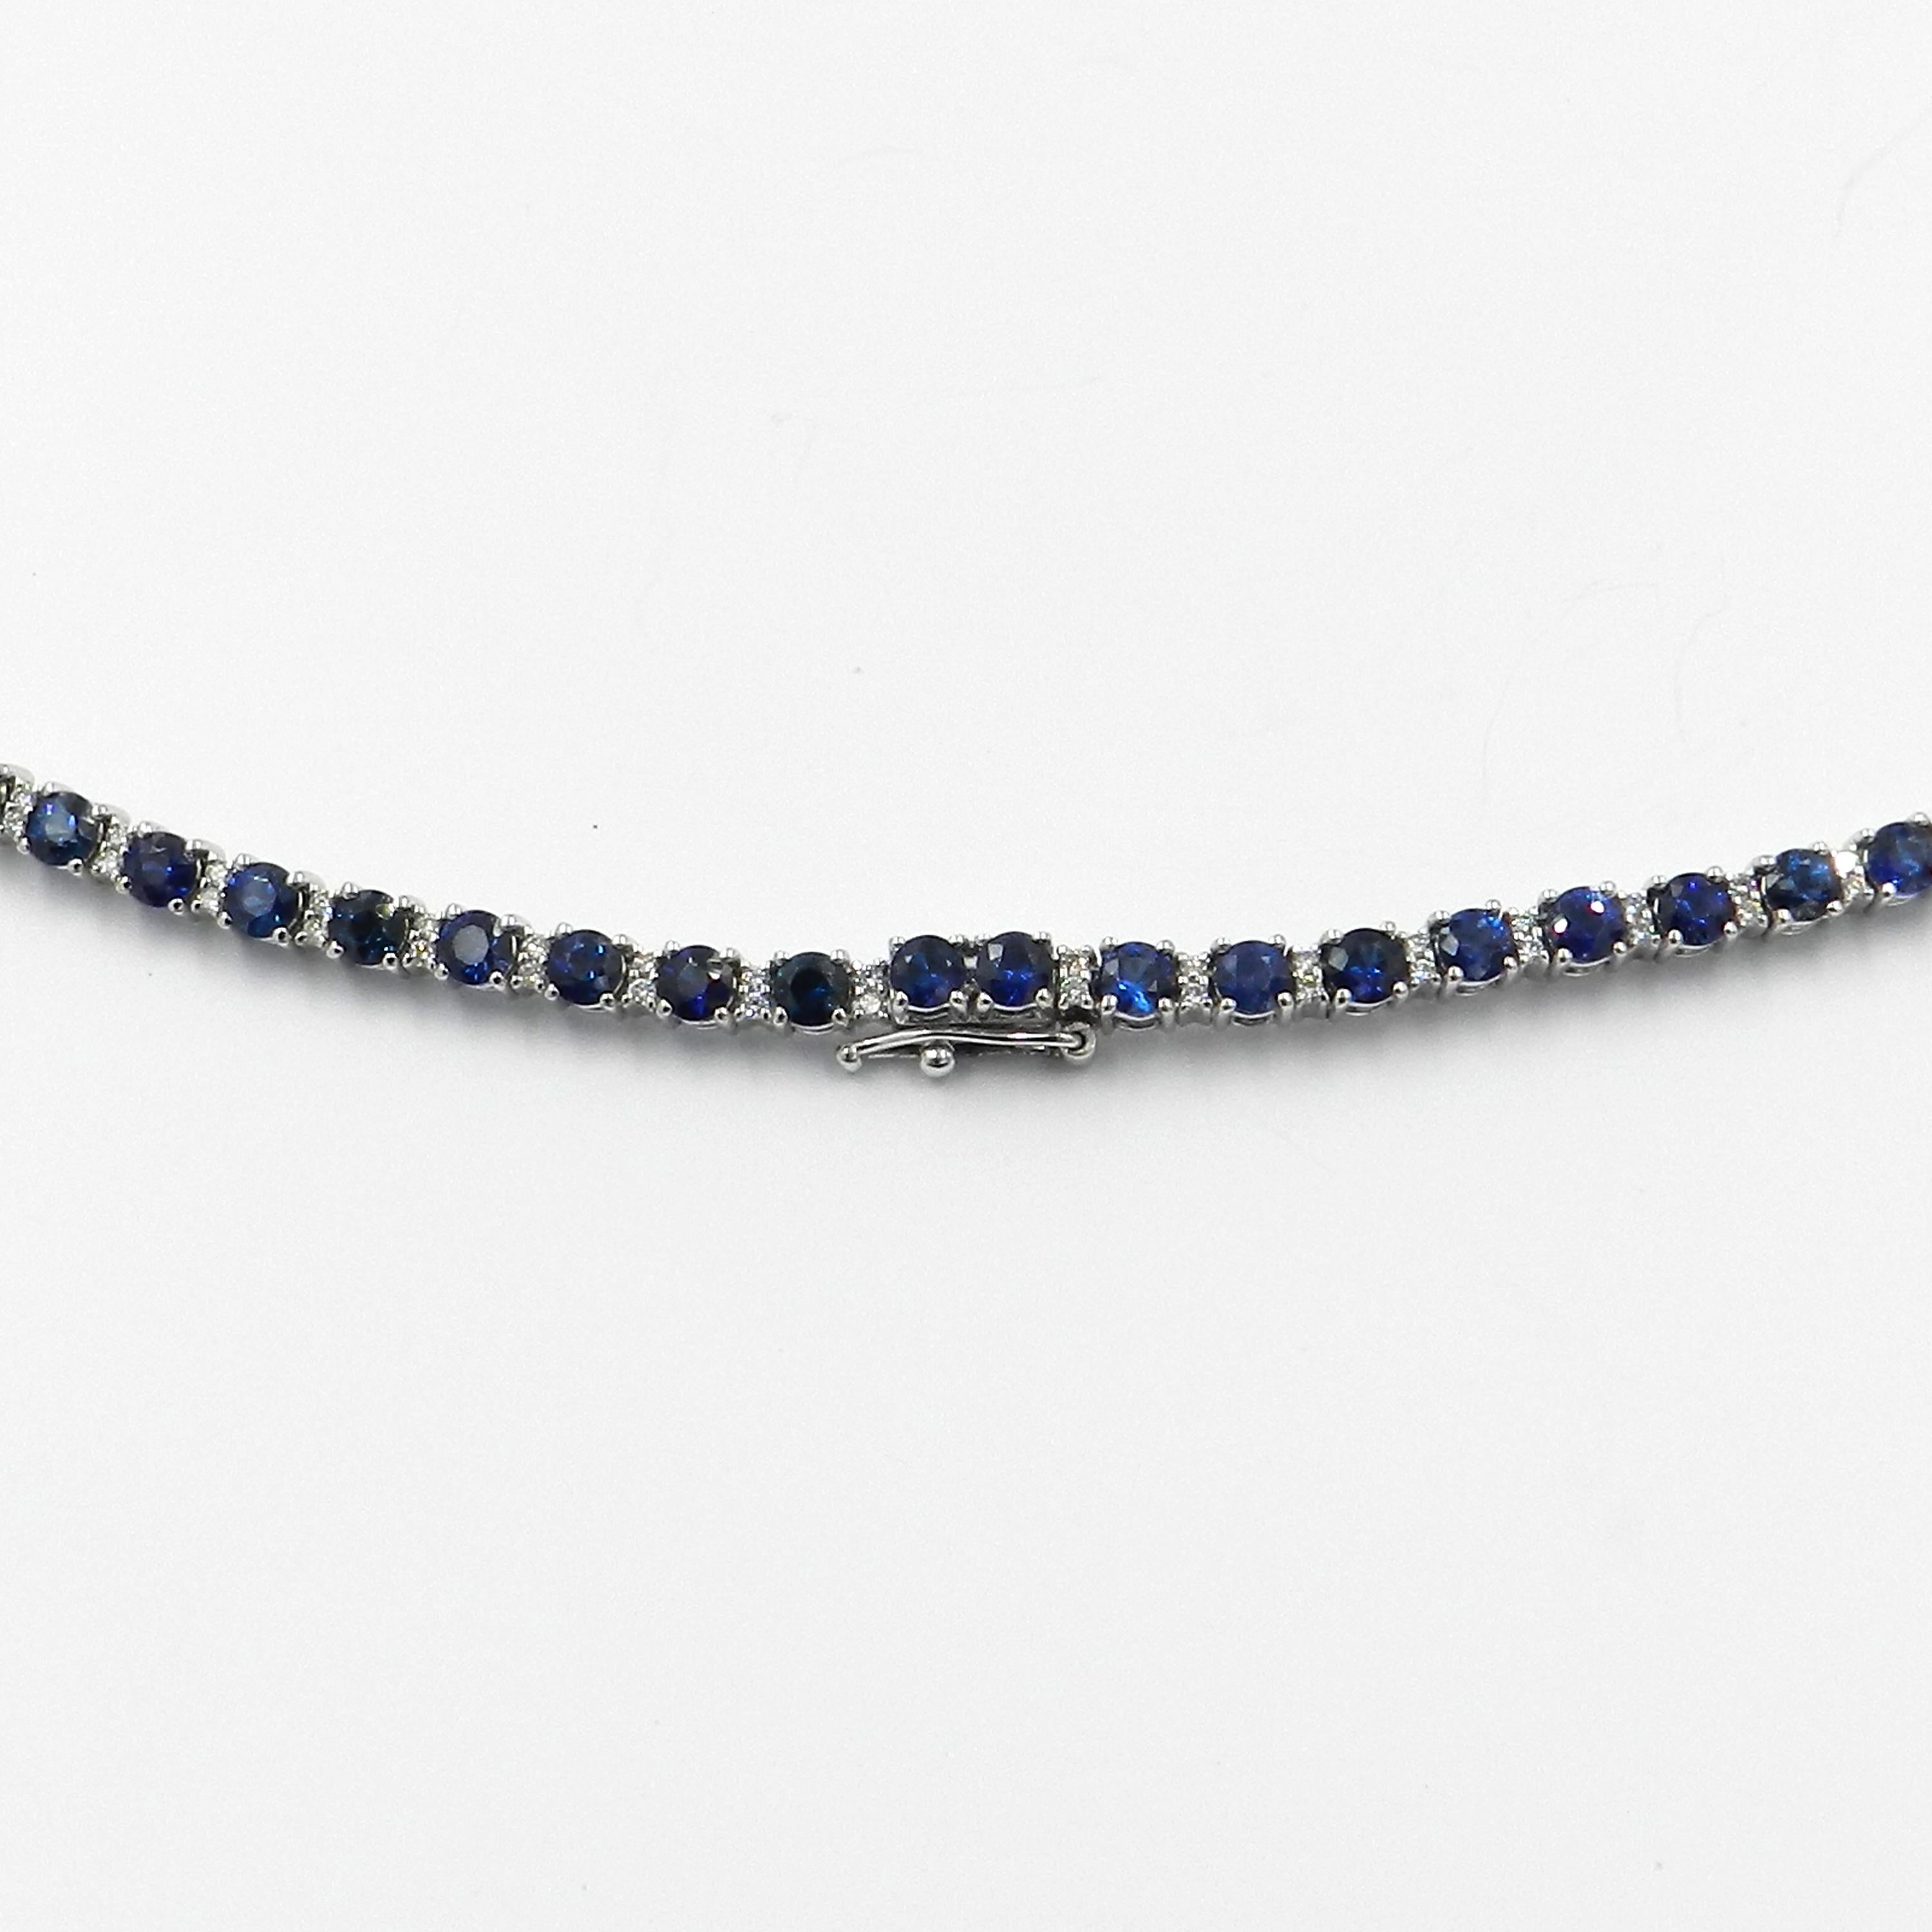 18KT White Gold BLUE SAPPHIRES and DIAMONDS GARAVELLI NECKLACE 

GOLD gr : 30,60
WHITE DIAMONDS ct : 1,15
BLUE SAPPHIRES ct  : 14,30